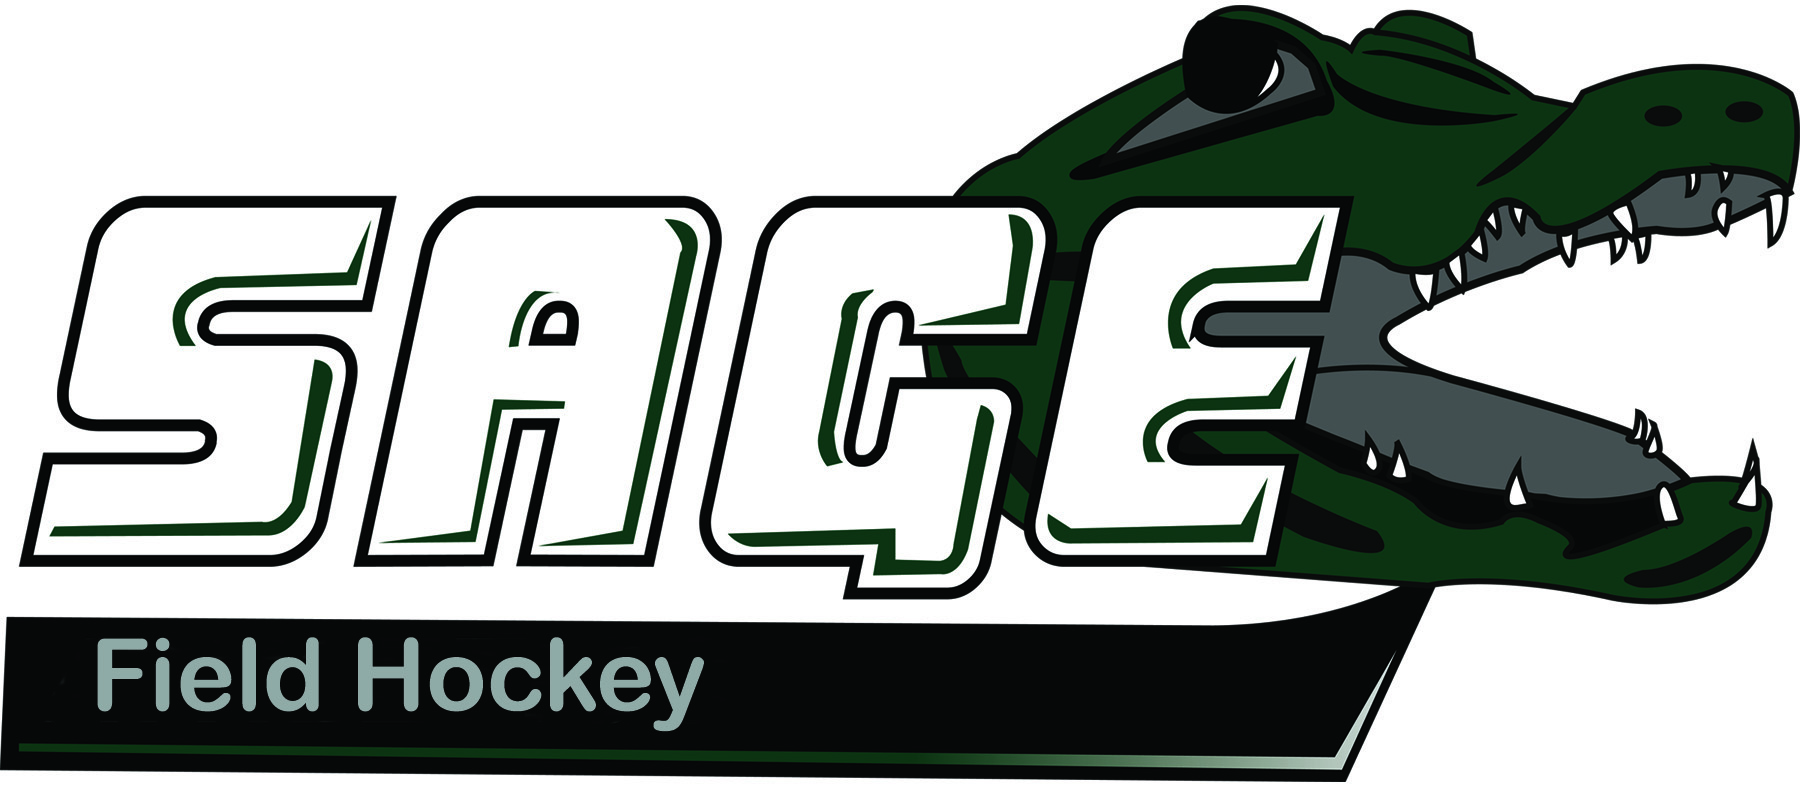 Interested in playing field hockey at Sage?